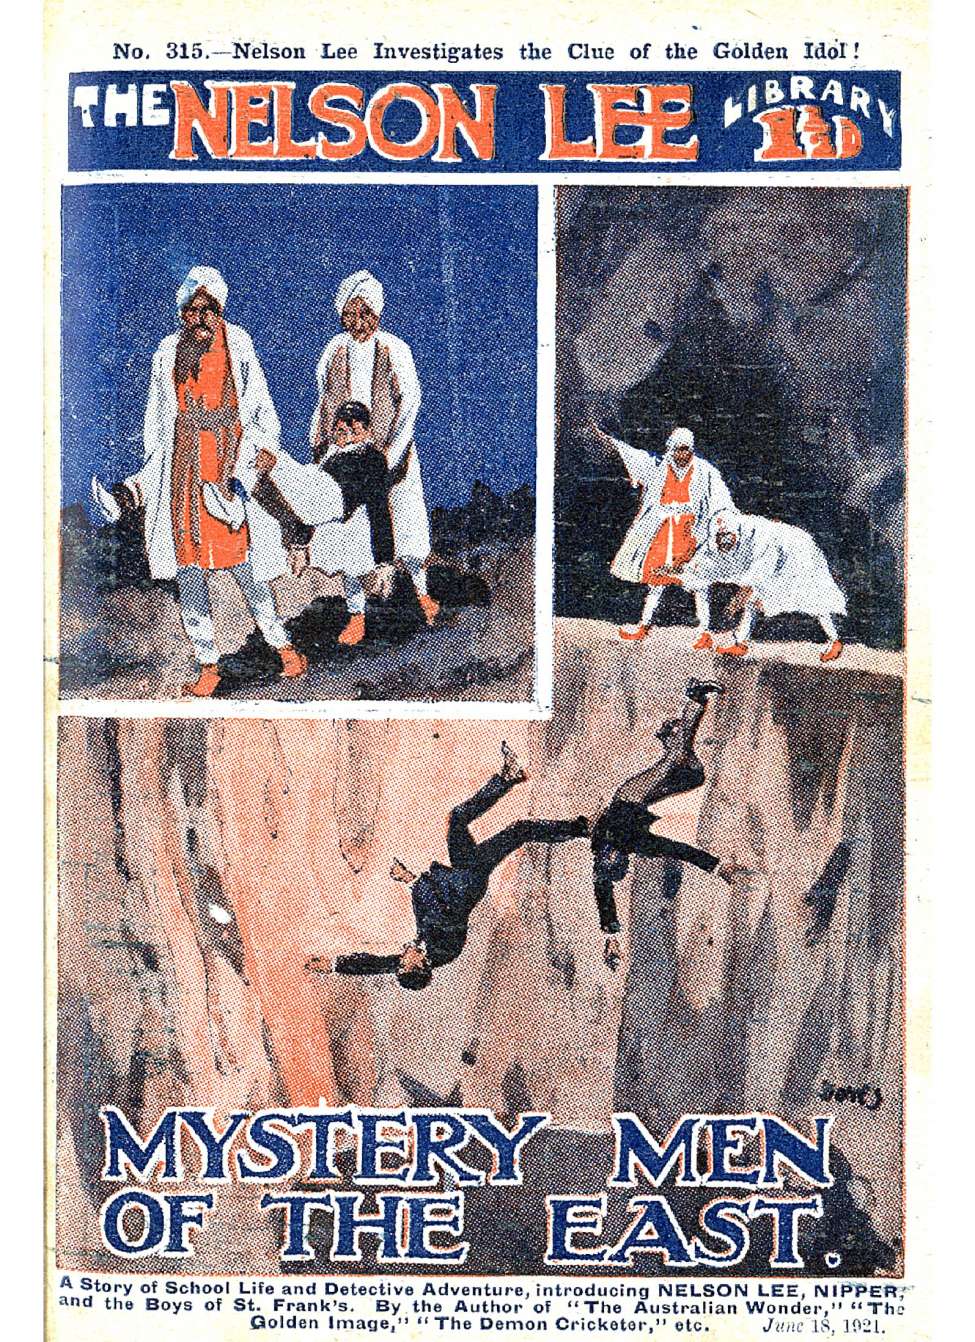 Book Cover For Nelson Lee Library s1 315 - Mystery Men of the East